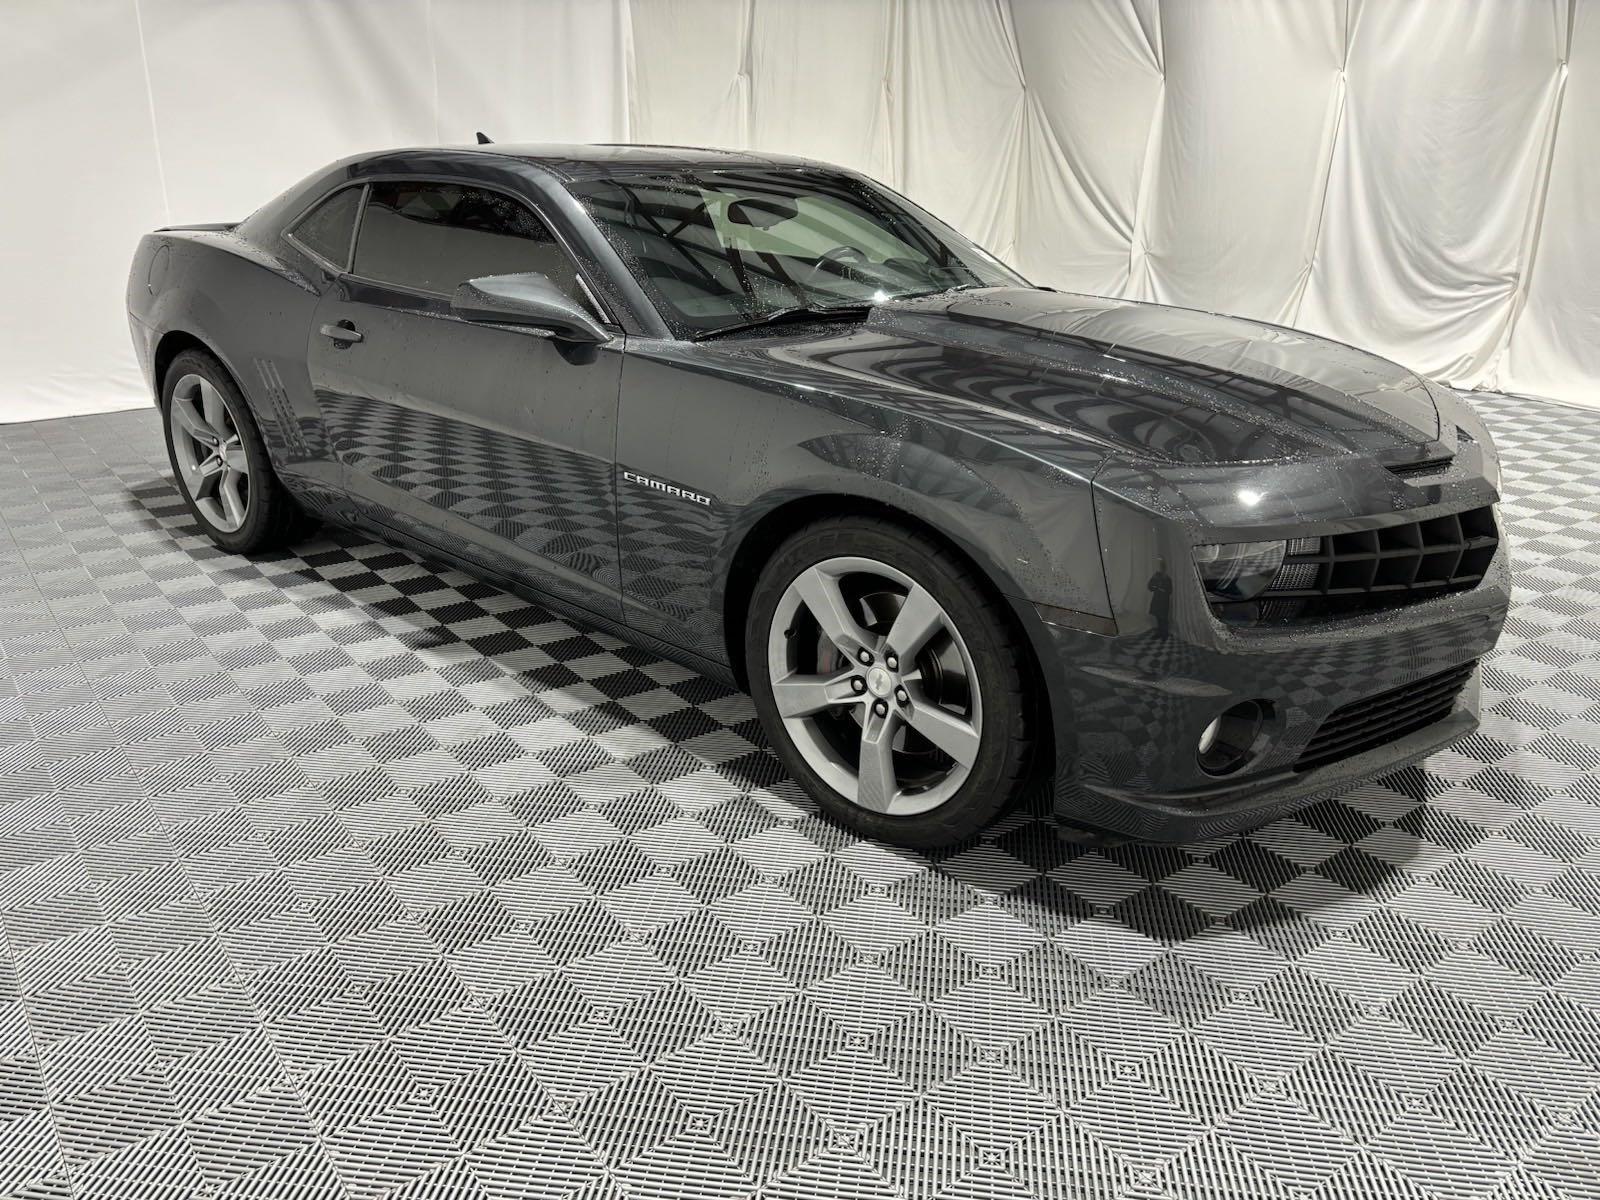 Used 2012 Chevrolet Camaro 1SS Coupe for sale in St Joseph MO